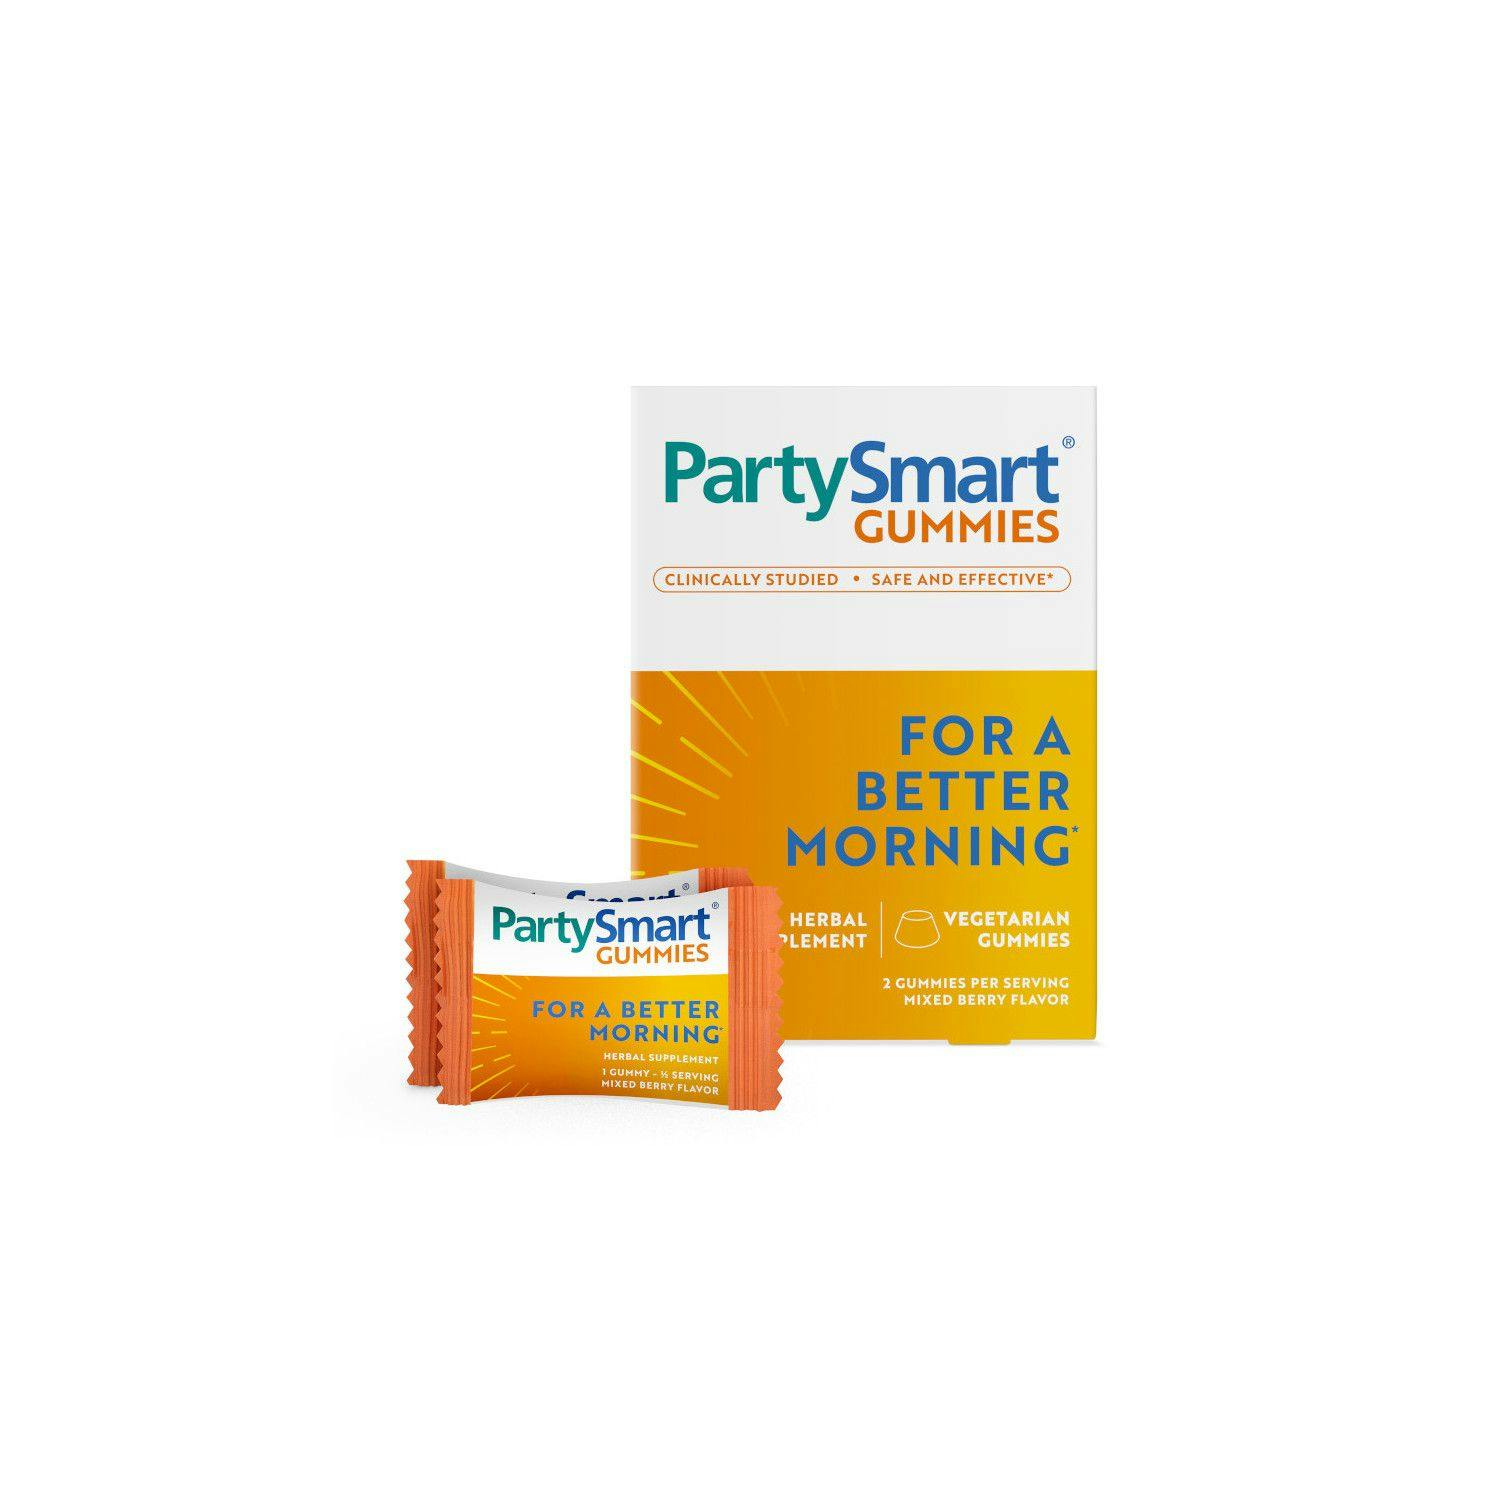 Himalaya Wellness touts new PartySmart Gummies for alcohol metabolism support